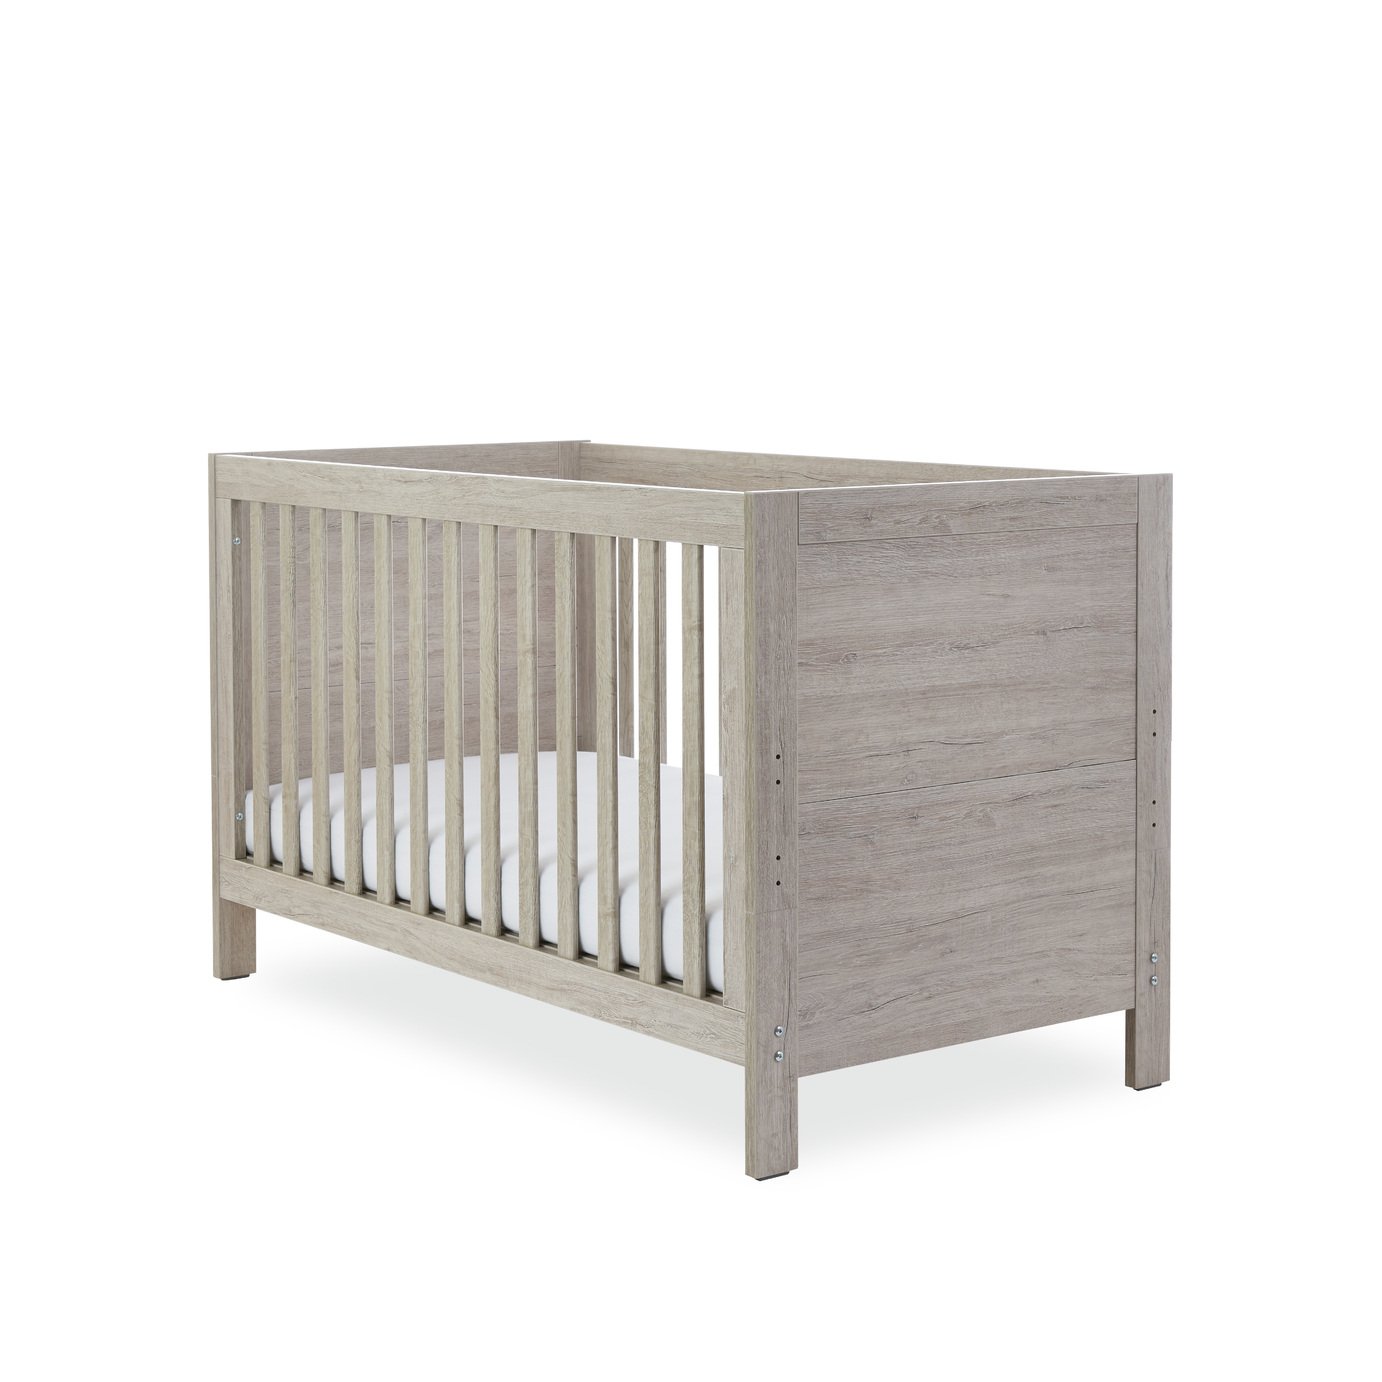 Ickle Bubba Grantham Baby Cot Bed Review